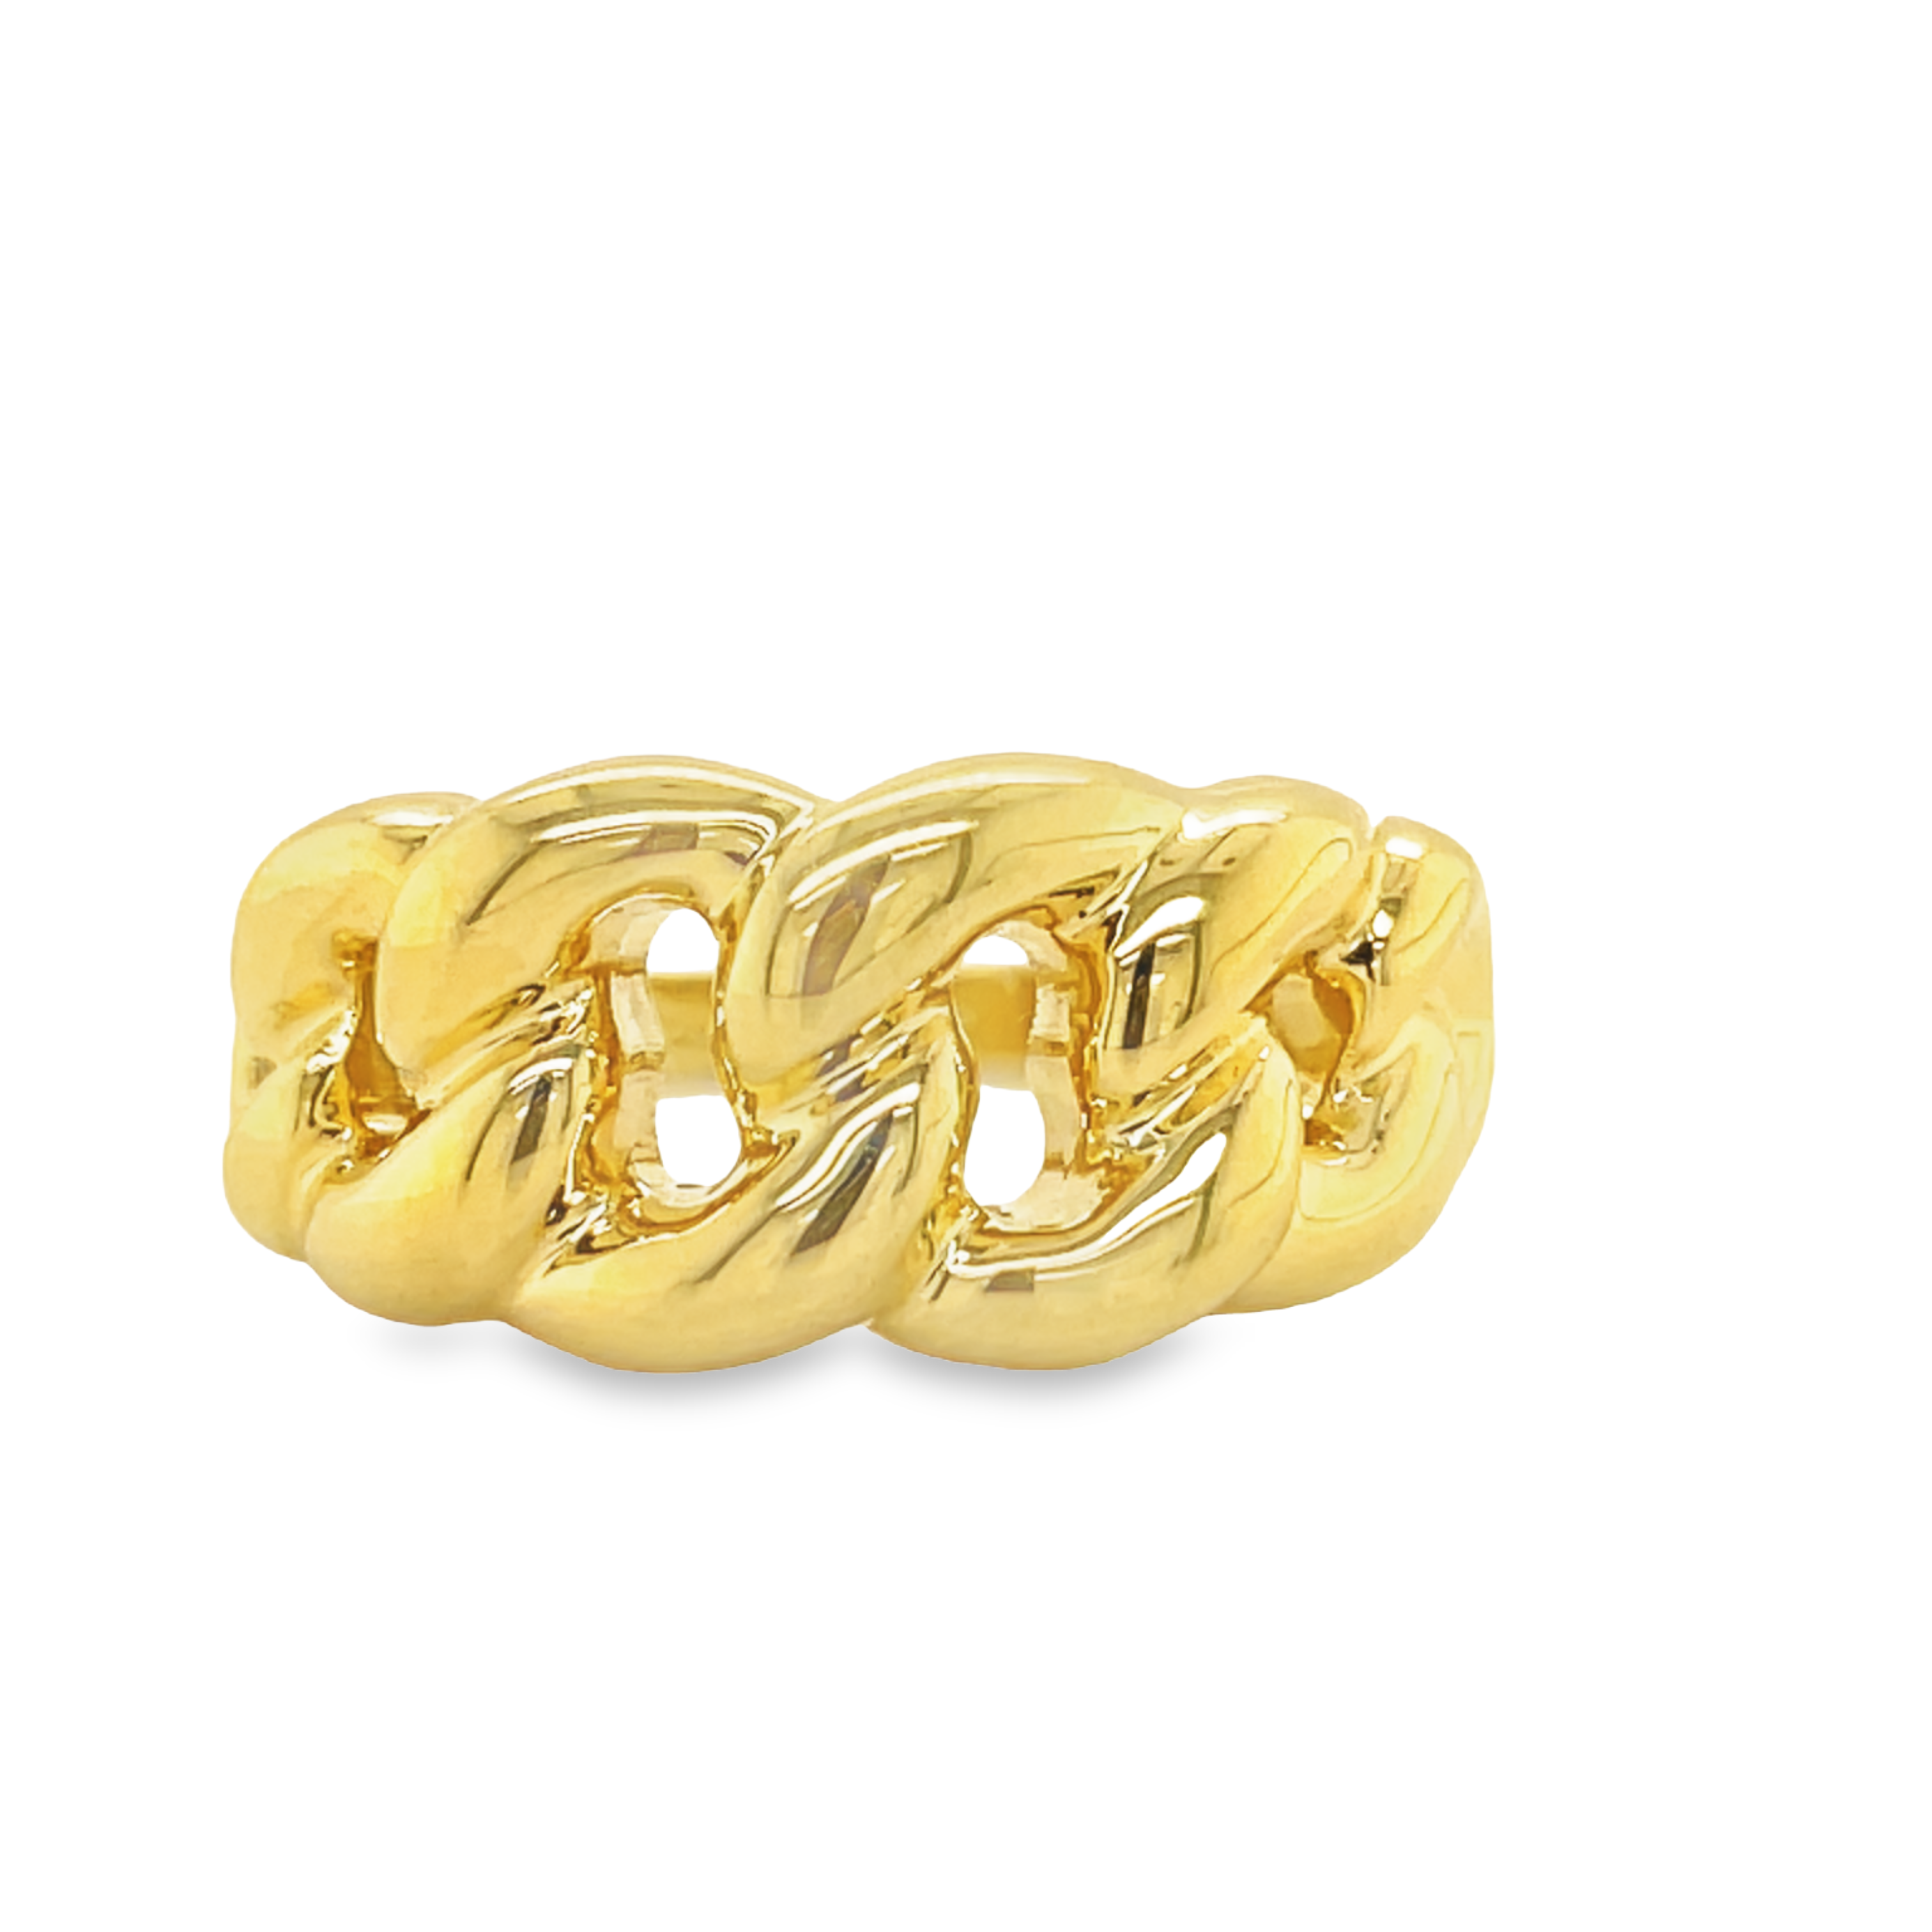 Expertly crafted in Italy, this 14k yellow gold chain link ring adds a touch of elegance to any look. The unique chain link style showcases the superior craftsmanship of Italian jewelry makers. Made with 14k gold, this ring is the perfect statement piece for any fashion-forward individual.